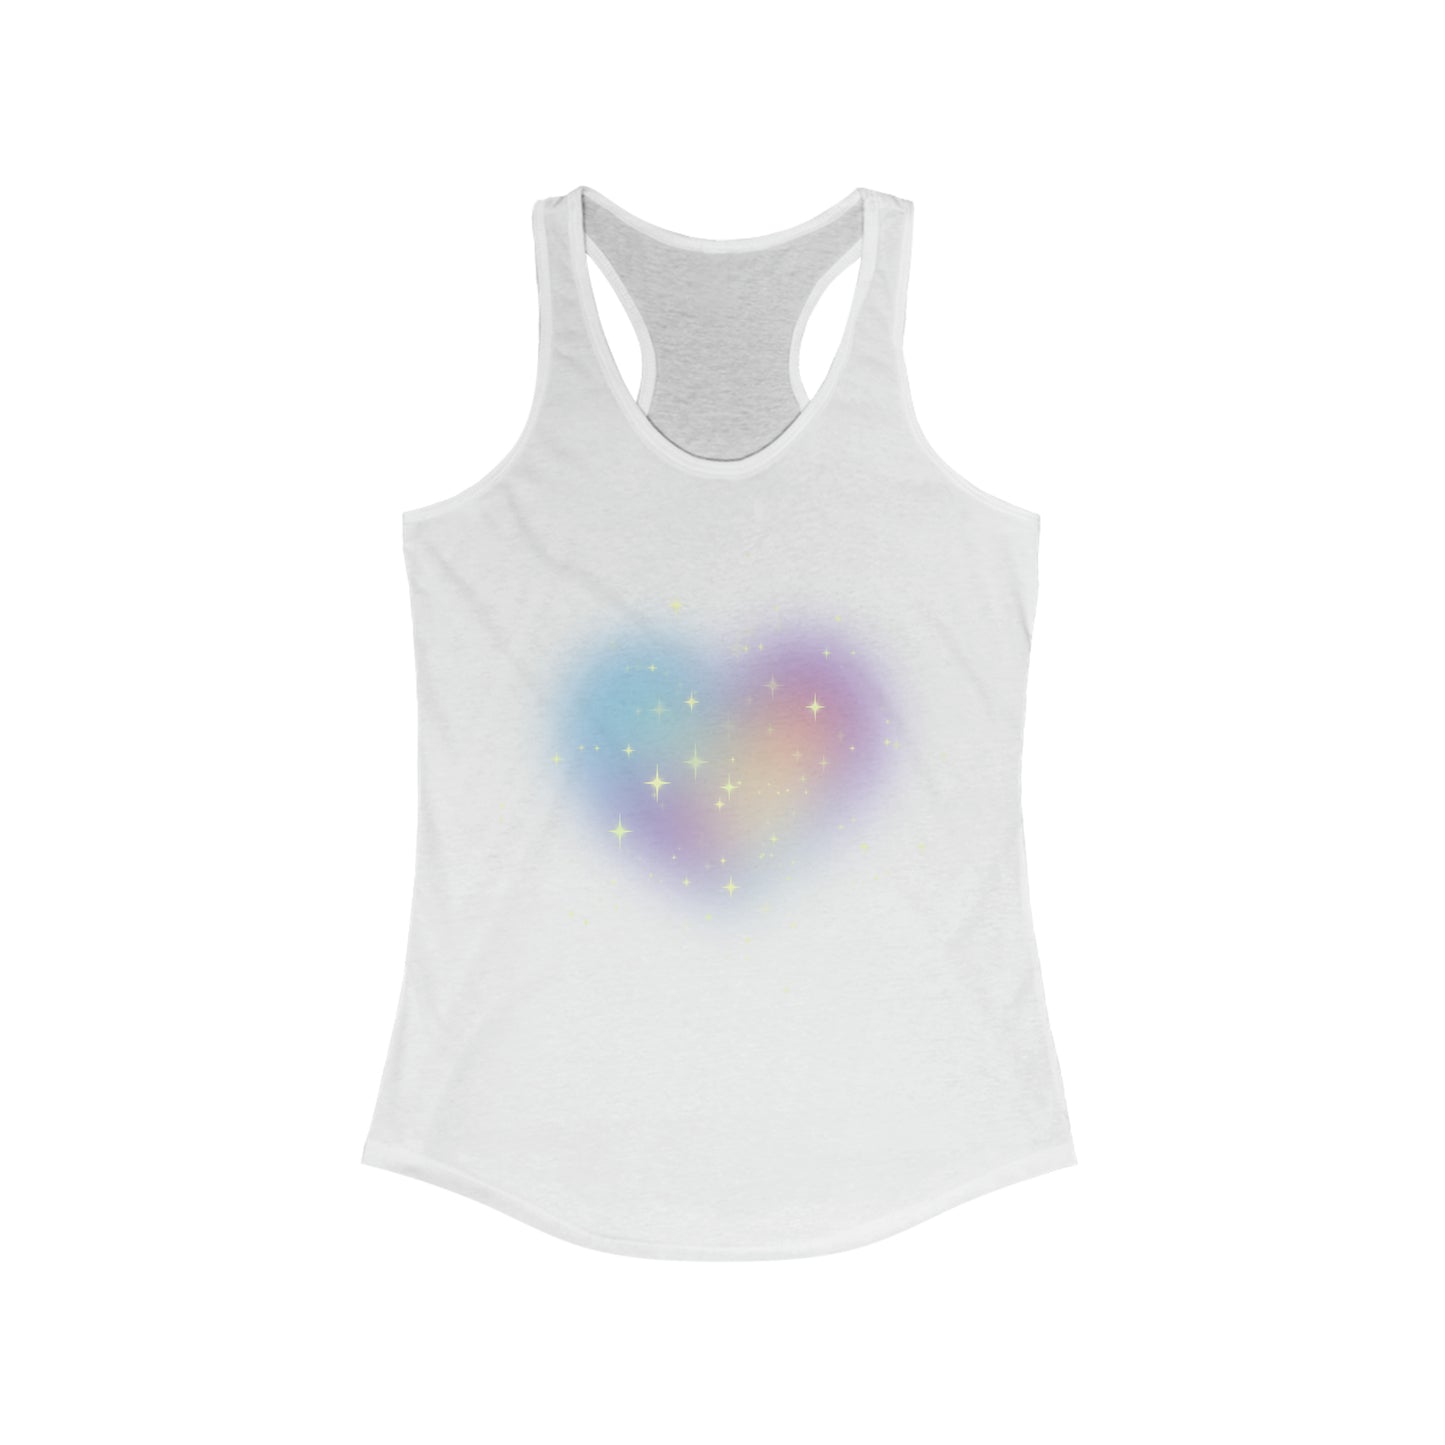 Tank Top - Cute and Comfy Soft Colors Sparkle Heart Women's Ideal Racerback Tank